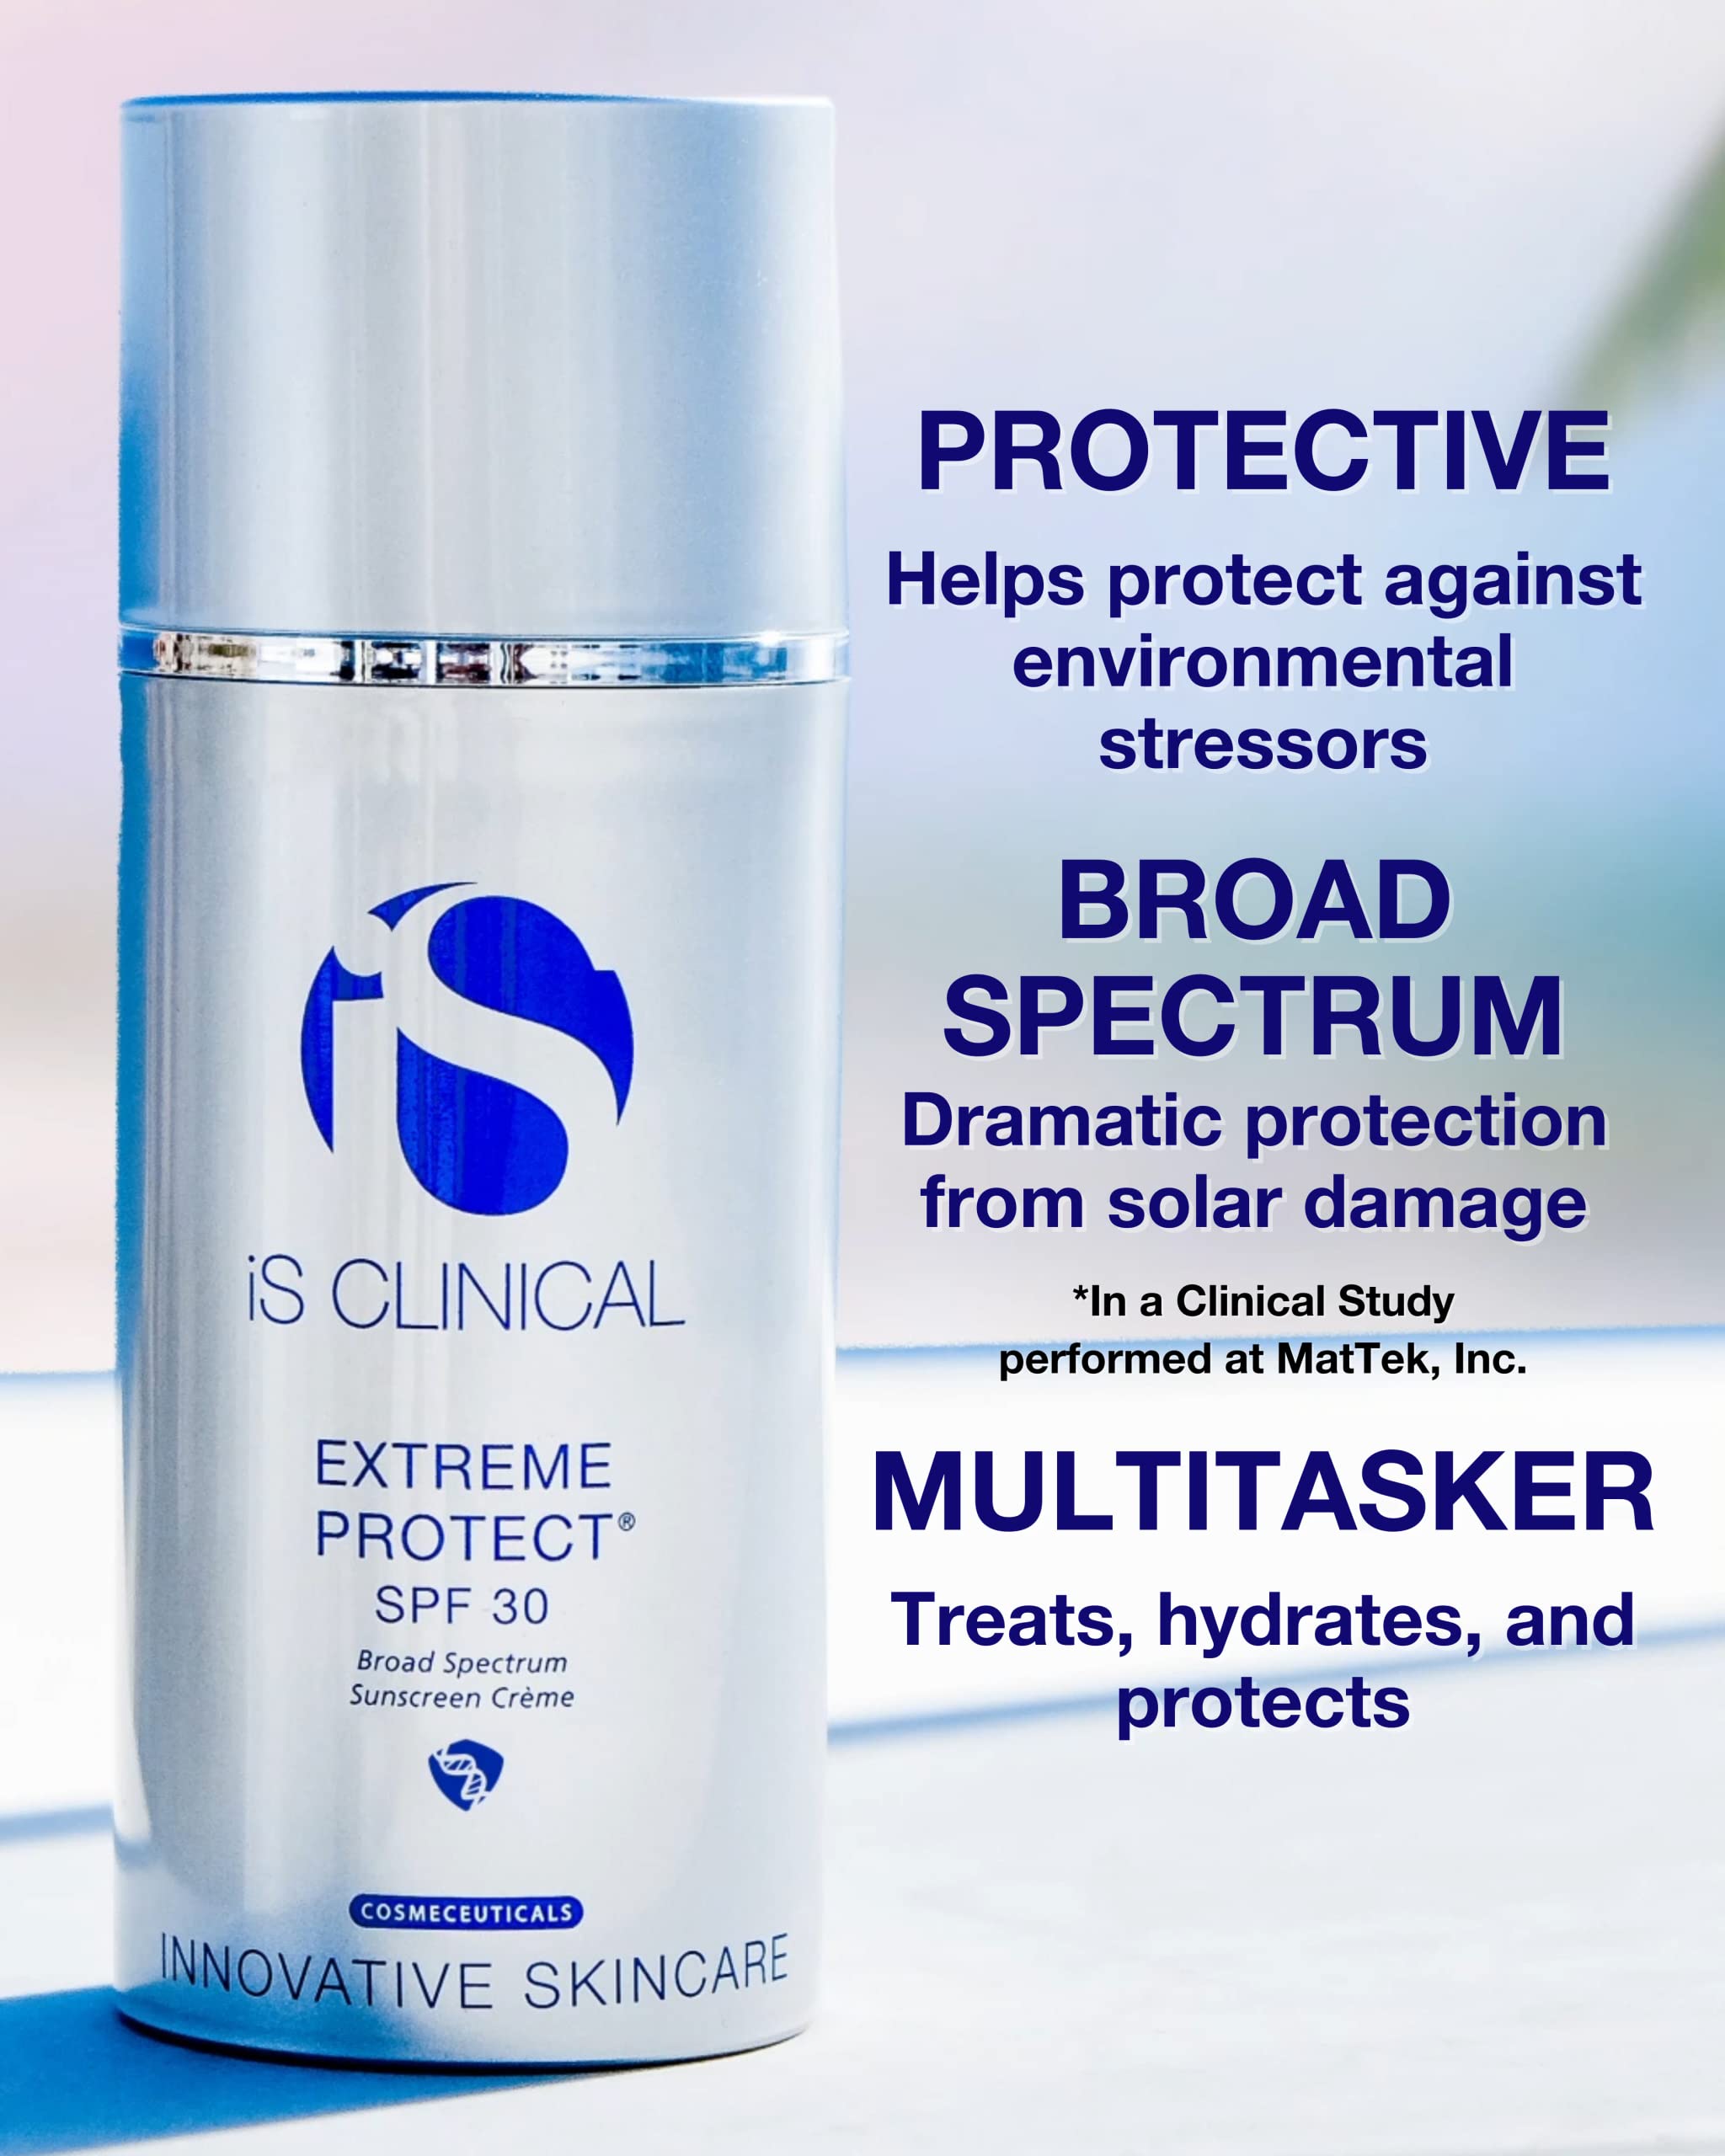 iS CLINICAL Extreme Protect SPF 30 Sunscreen, Everyday Moisturizer with SPF, Hydrating Treatment Sunscreen